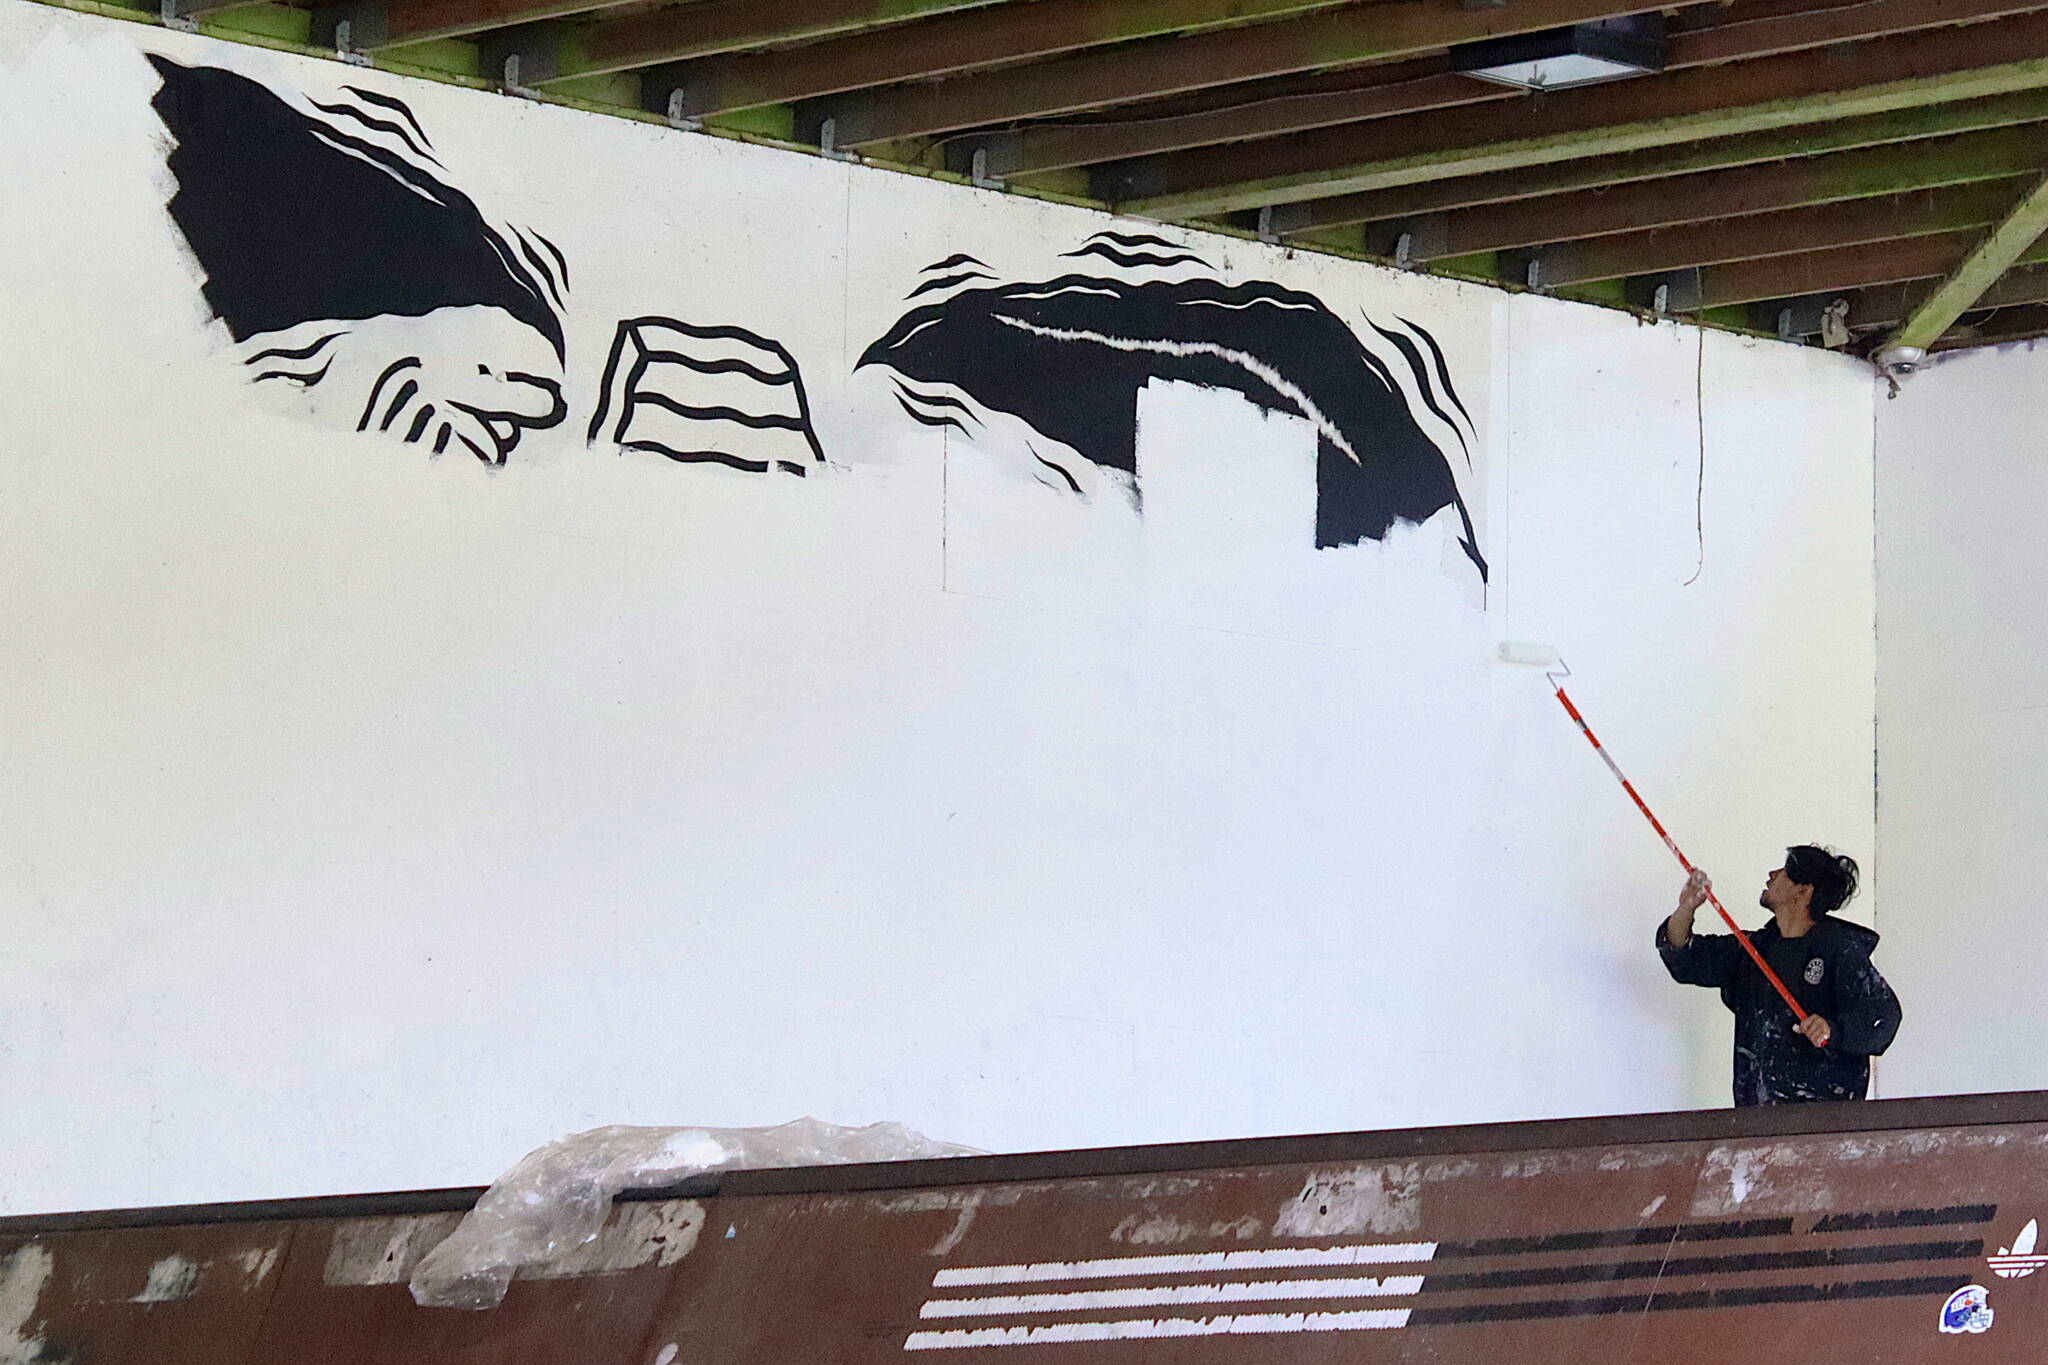 Scott Belleza paints over a mural at the Pipeline Skate Park on Saturday, with a new collection of murals planned for the walls of the facility during the coming months. (Mark Sabbatini / Juneau Empire)